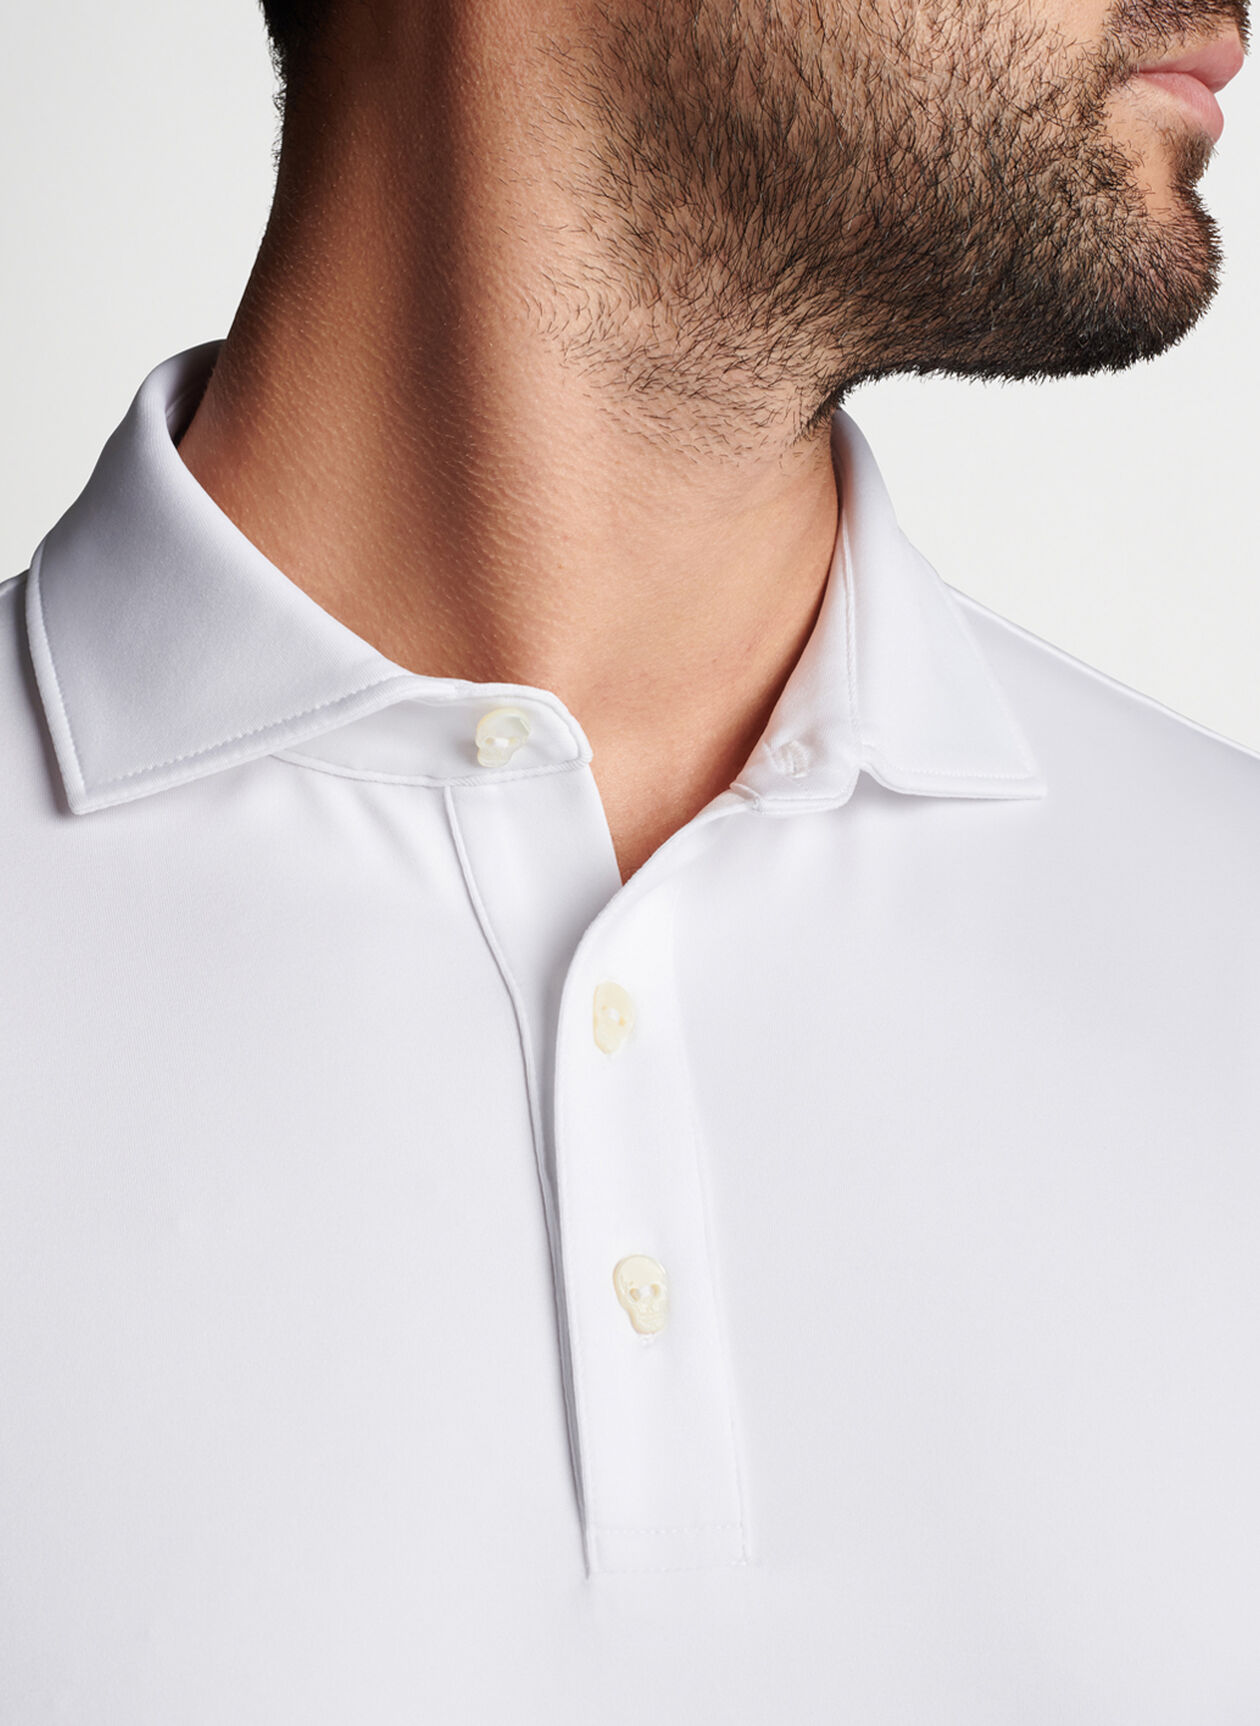 Solid Performance Jersey Polo (Edwin Spread Collar) | Men's Polo Shirts ...